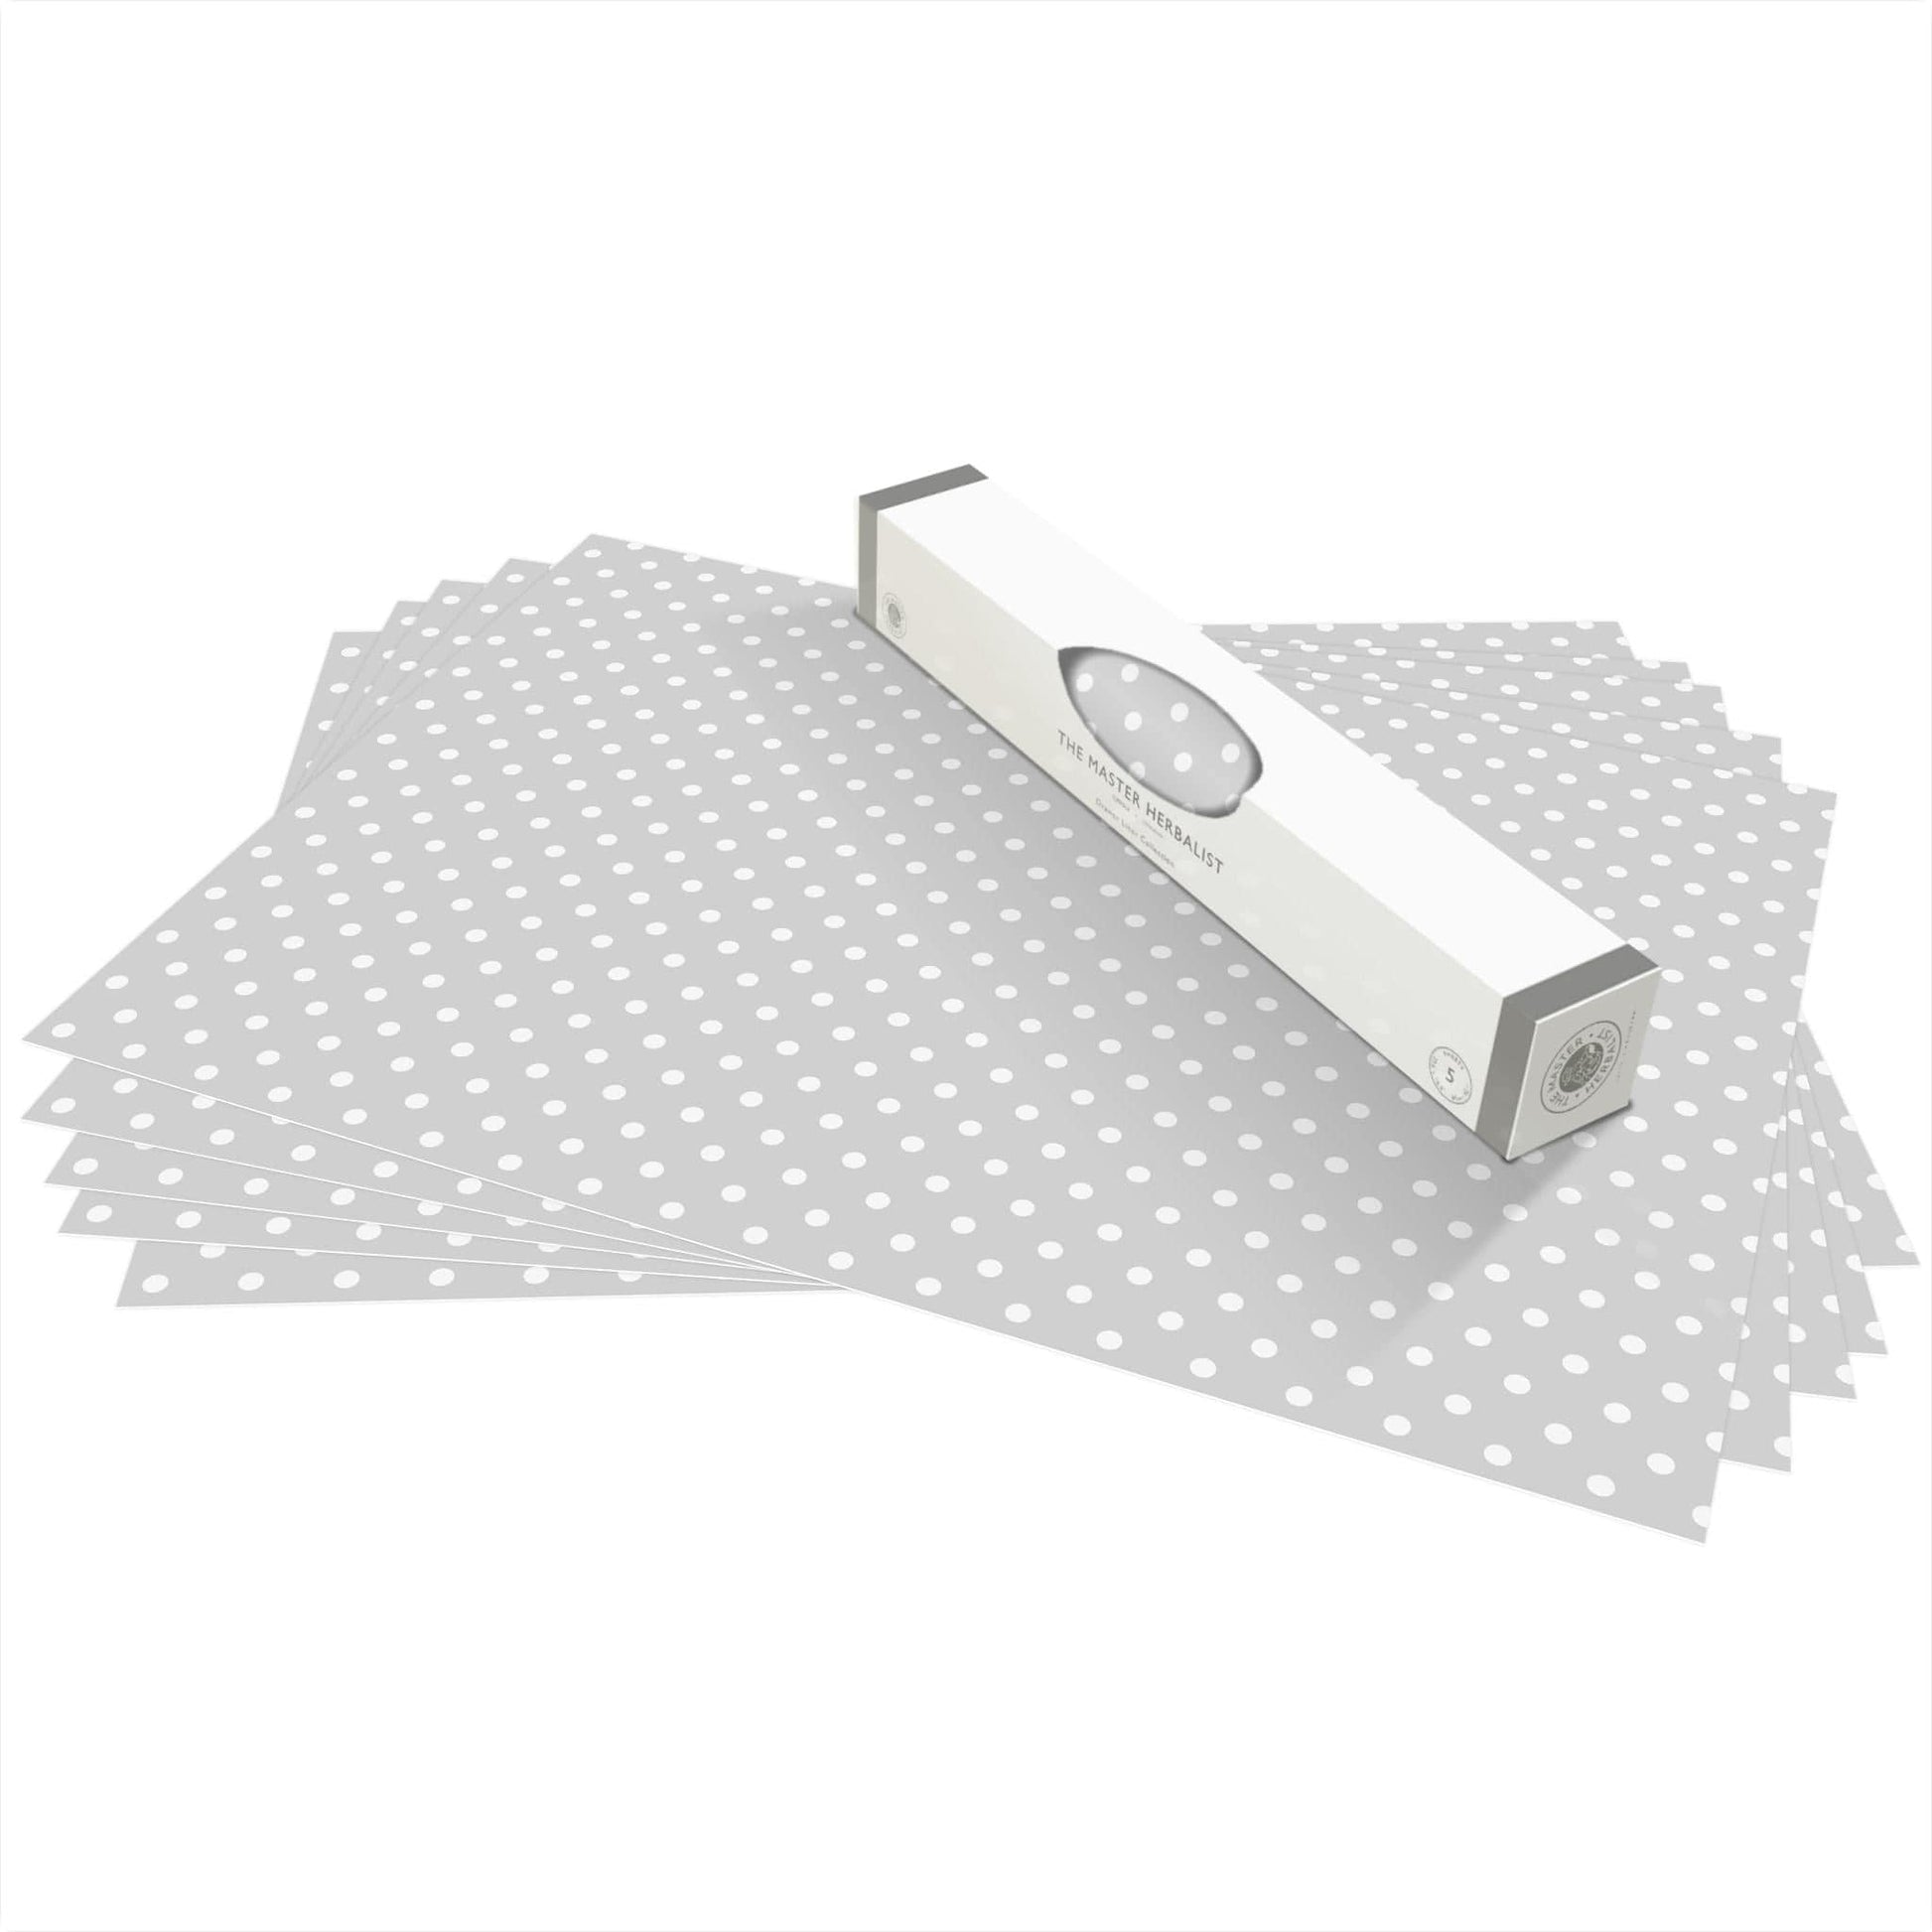 THE MASTER HERBALIST | Wipe Clean & Unscented Drawer Liners in a SOFT GREY POLKA DOT Design. Perfect for Kitchen Drawers, Shelves, Cupboards & Cabinets. Made in Suffolk, England. (Soft Grey)